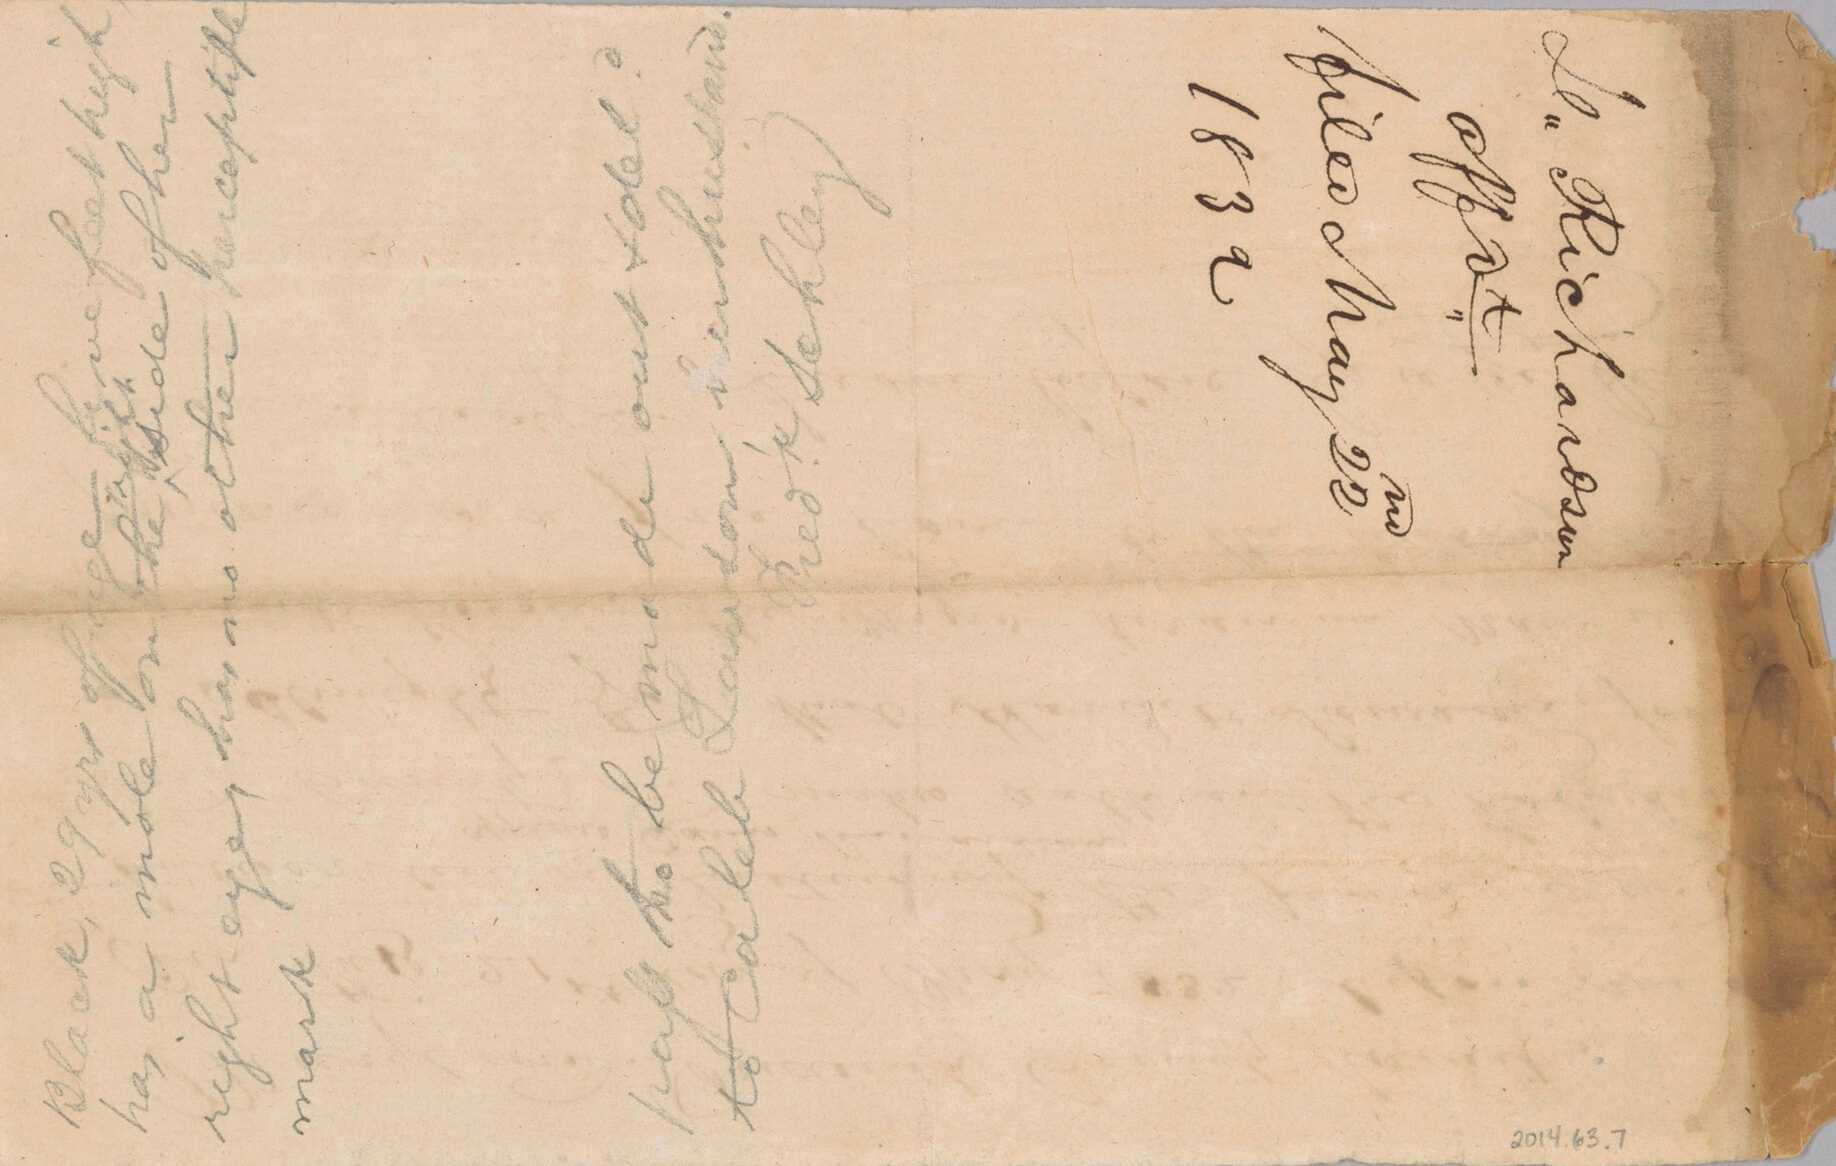 A free woman's pass for Harriet Lawson, a free black woman, to visit her husband Caleb Lawson, signed in Frederick County, Maryland, on May 21, 1832. Davis Richardson is listed as the witness. The pass is on a single sheet of paper. There is handwriting in ink on both recto and verso, handwriting in pencil on verso only. The proper right side has discoloration and abrasions with loss of paper along the edge but no apparent loss of text. The ink writing from the verso side is visible faintly through to the recto side. Creases remain from the pass having been folded twice, once lengthwise and once widthwise.